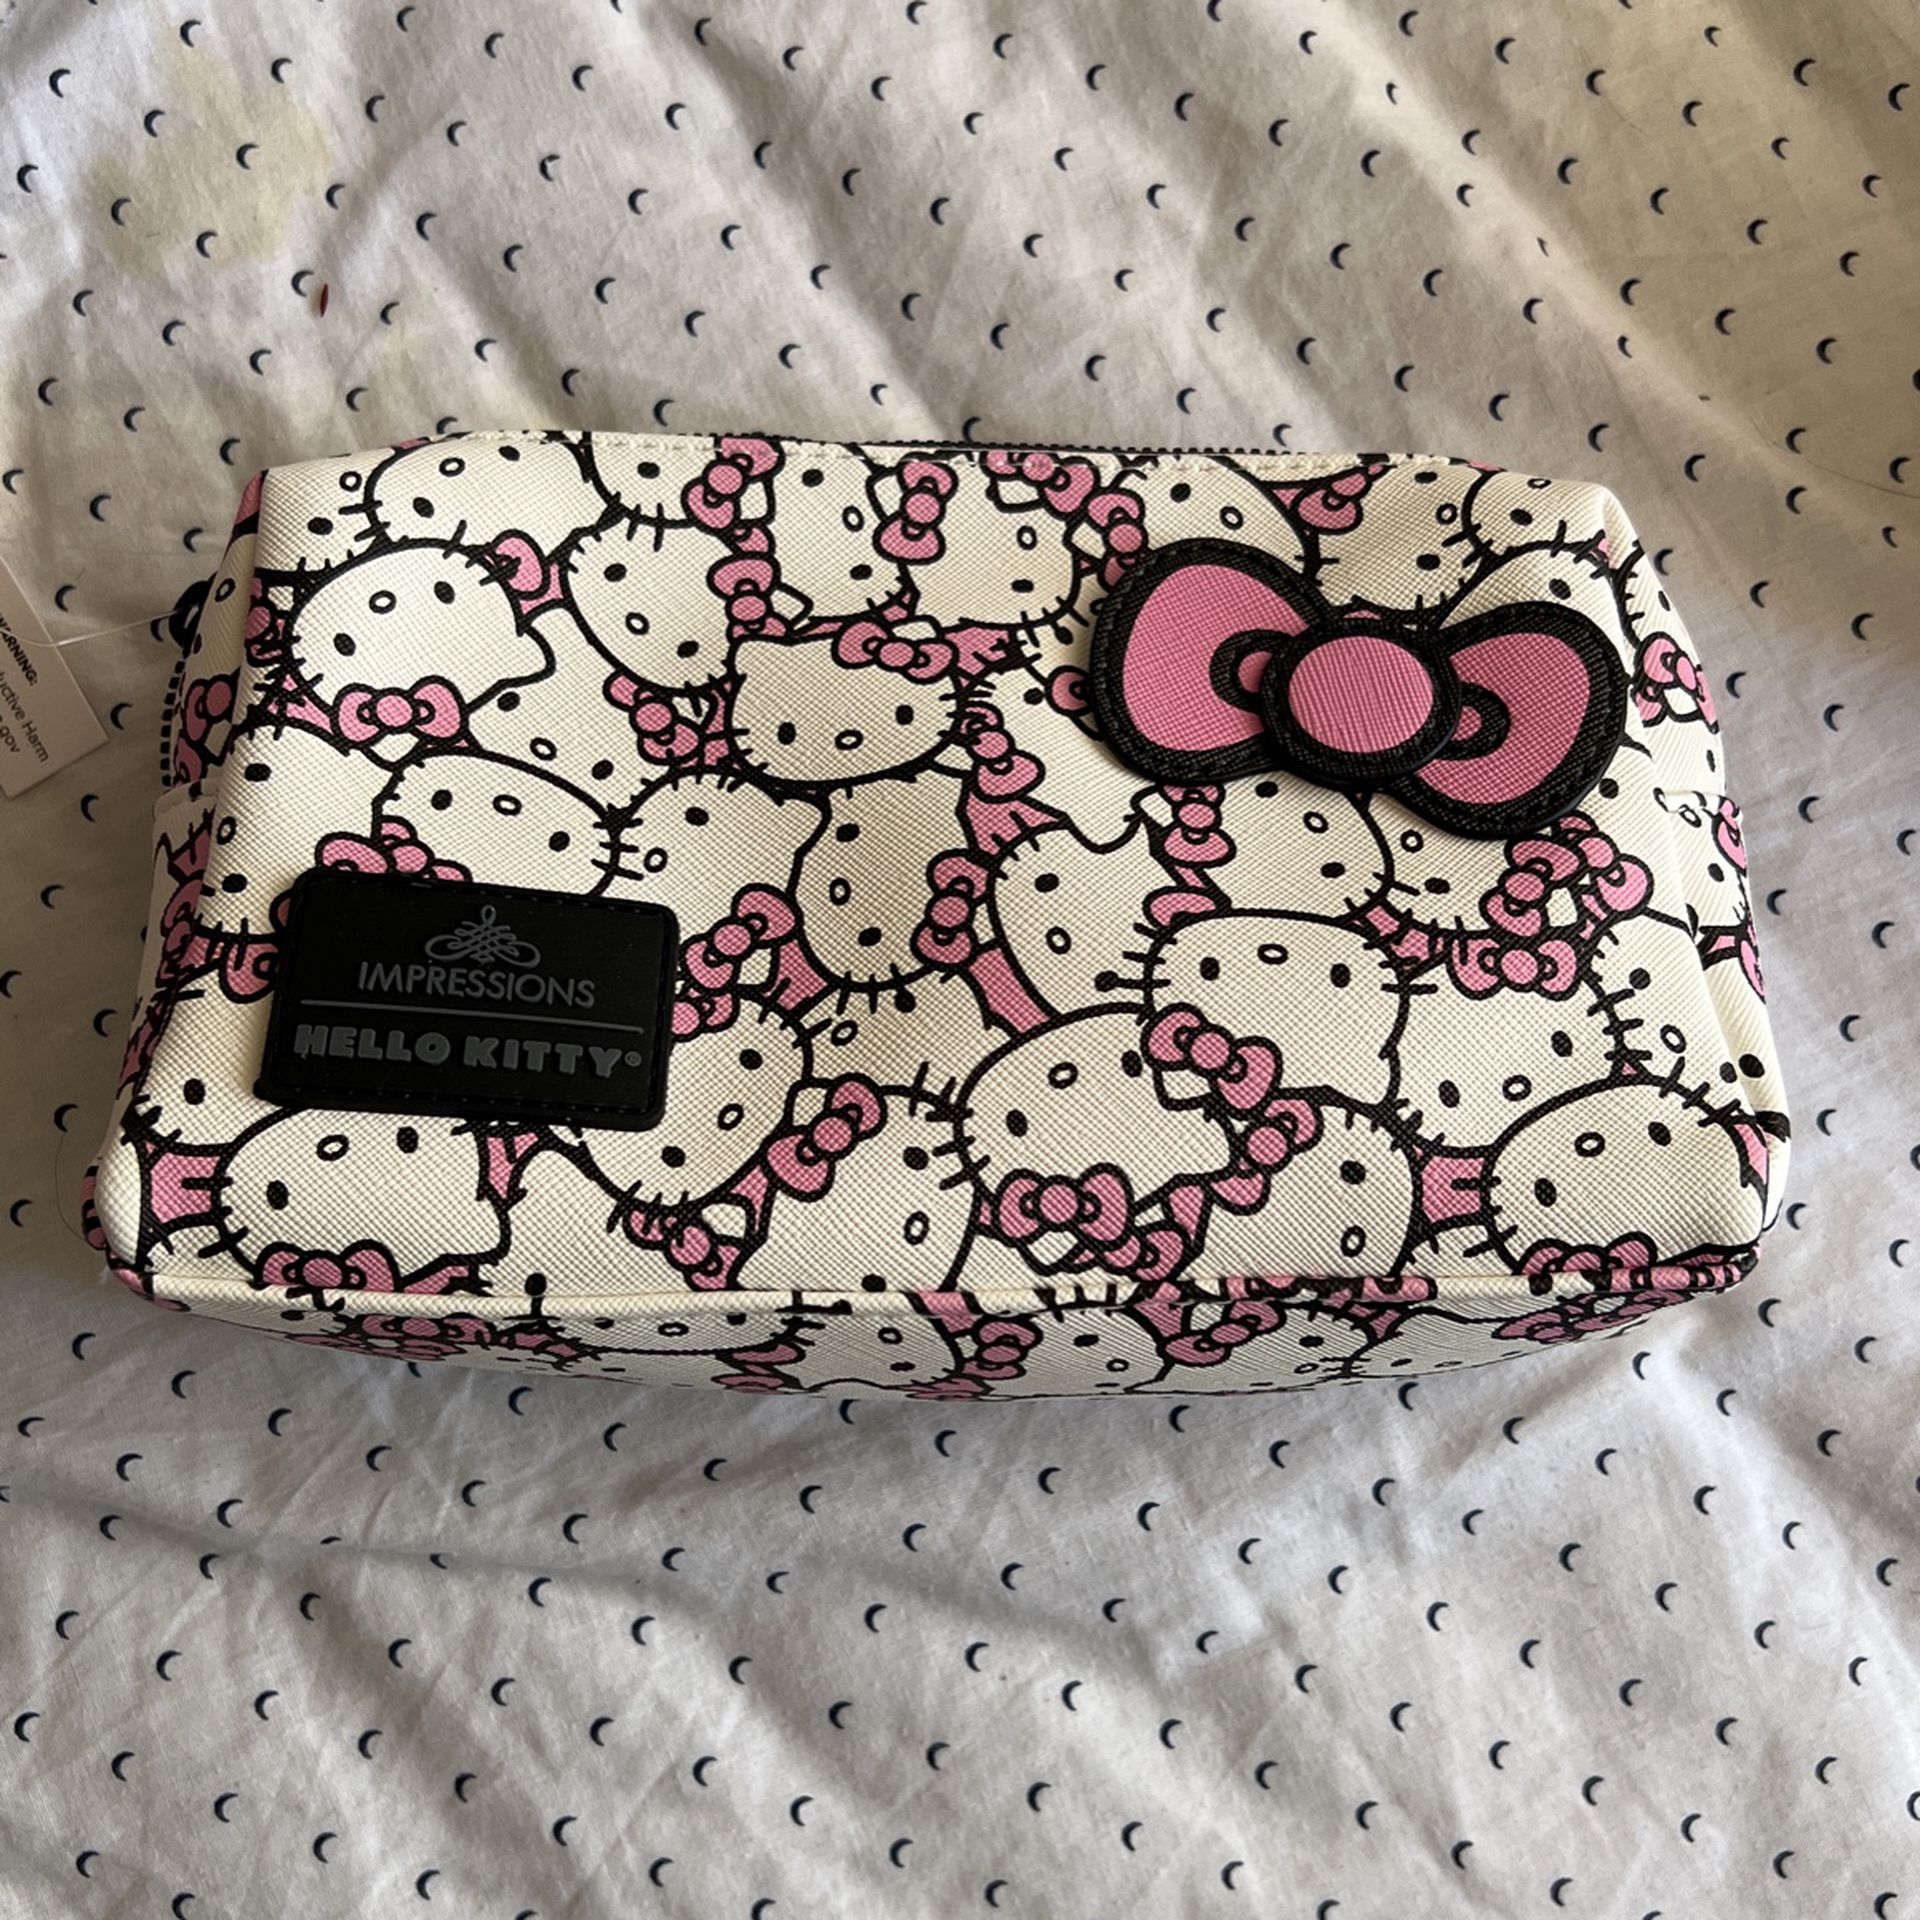 Hello Kitty Impression Cosmetic Bag for Sale in Bakersfield, CA - OfferUp